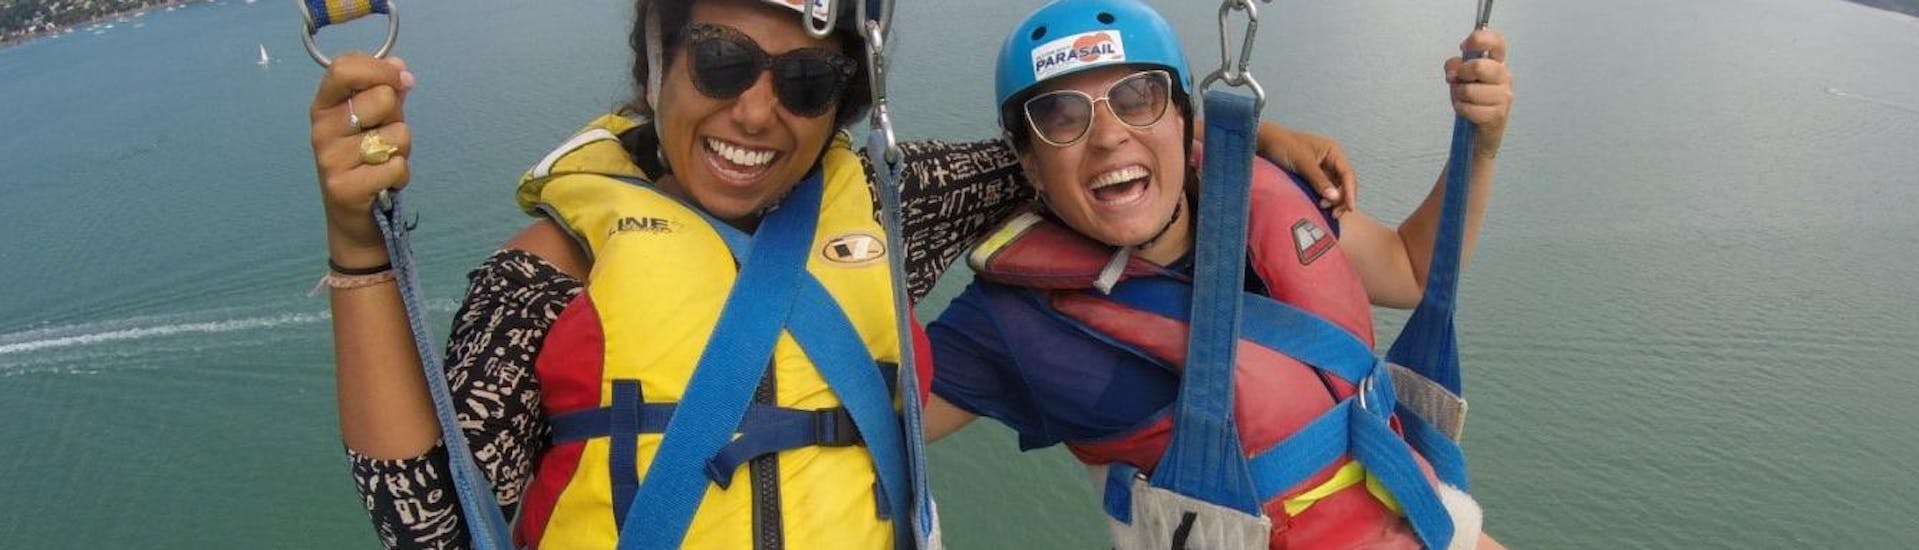 Gilrs are having a great time during the Parasailing in Paihia - For 1 Person organised by Bay of Islands Parasail.